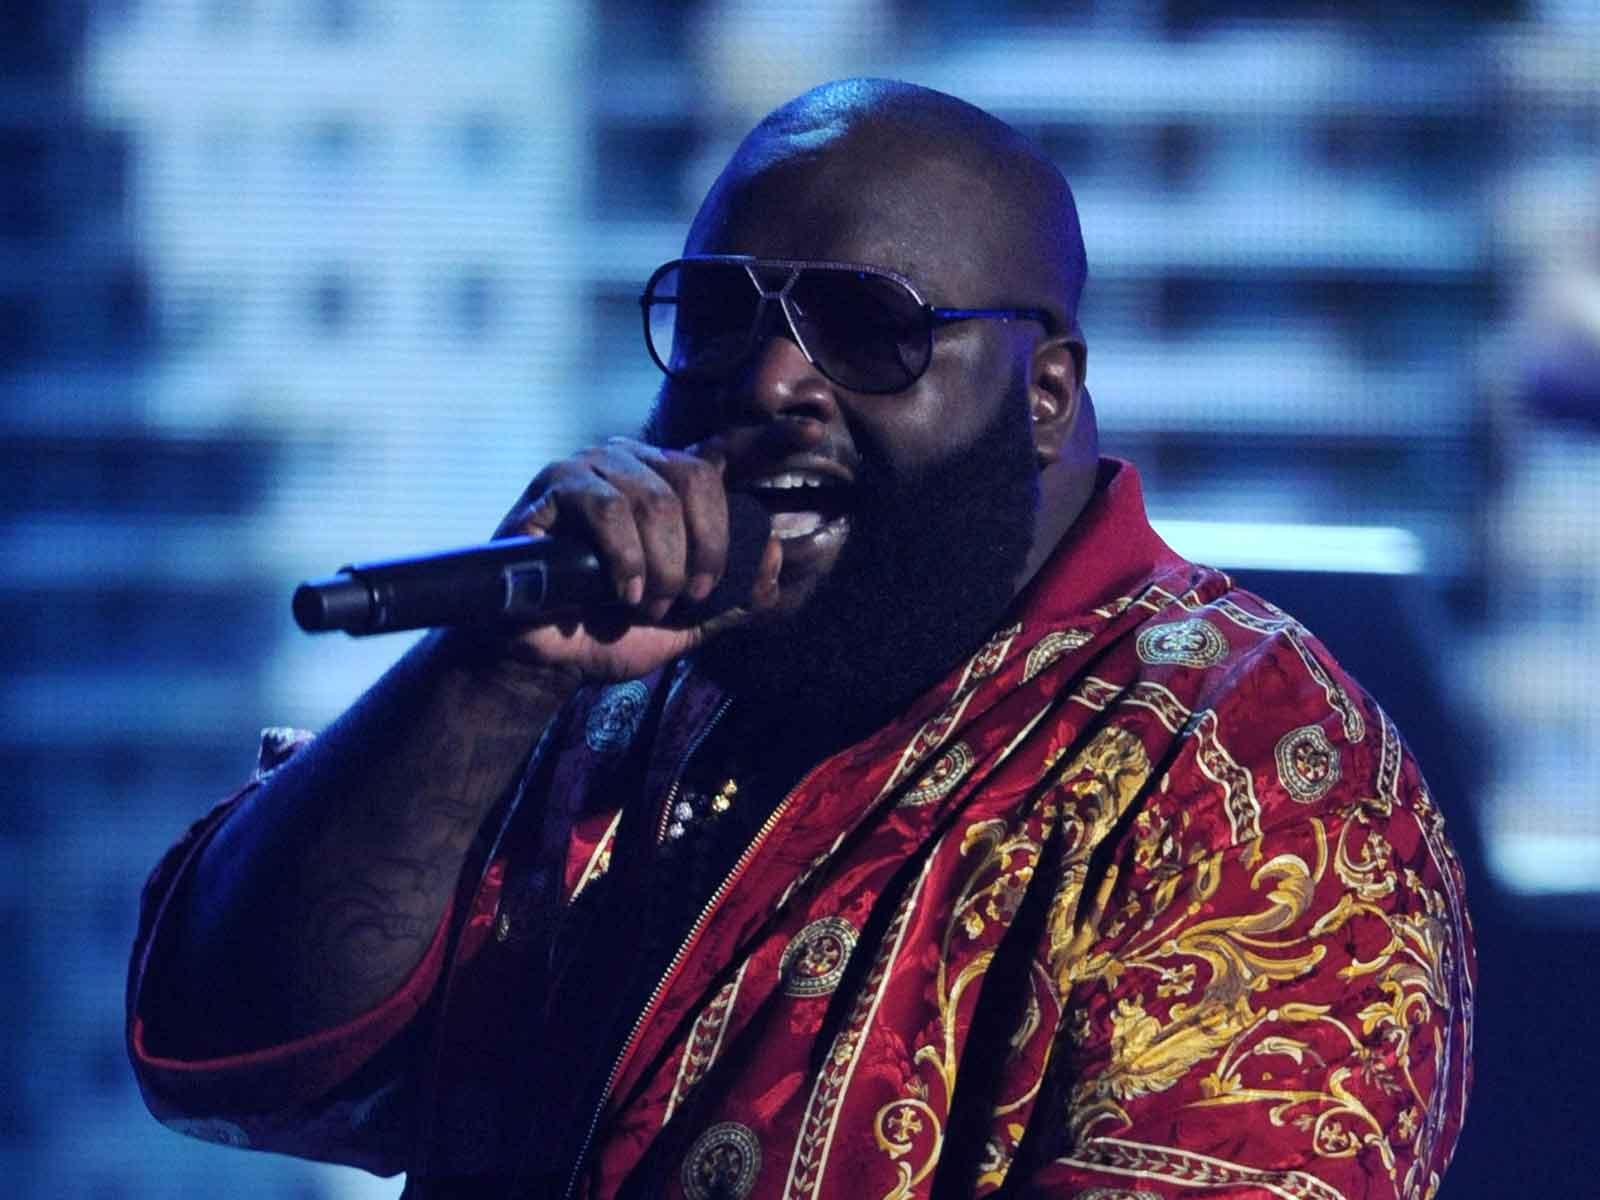 Rick Ross Wants Baby Mama’s Social Media Accounts Suspended After She Trashes Him Online